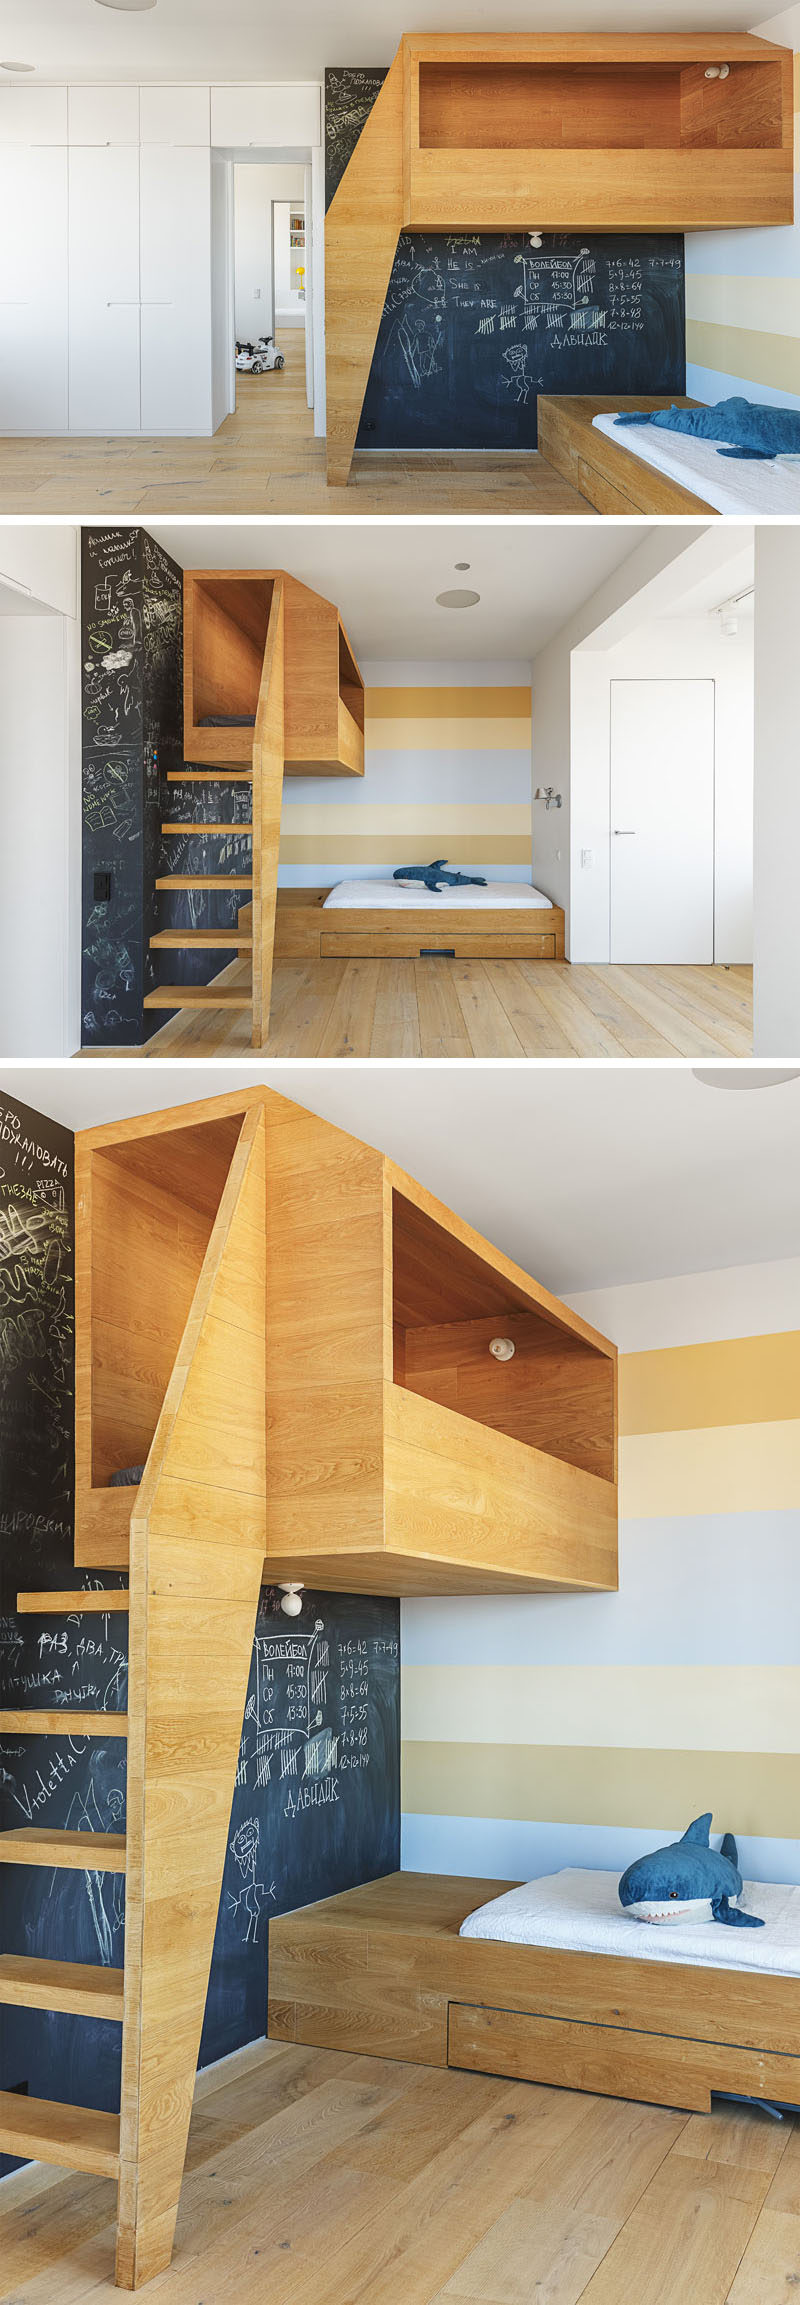 In this kids bedroom, there's a 'nest', an elevated wooden box or cubby that looks out over the rest of the bedroom and gives the children a quiet place to play.